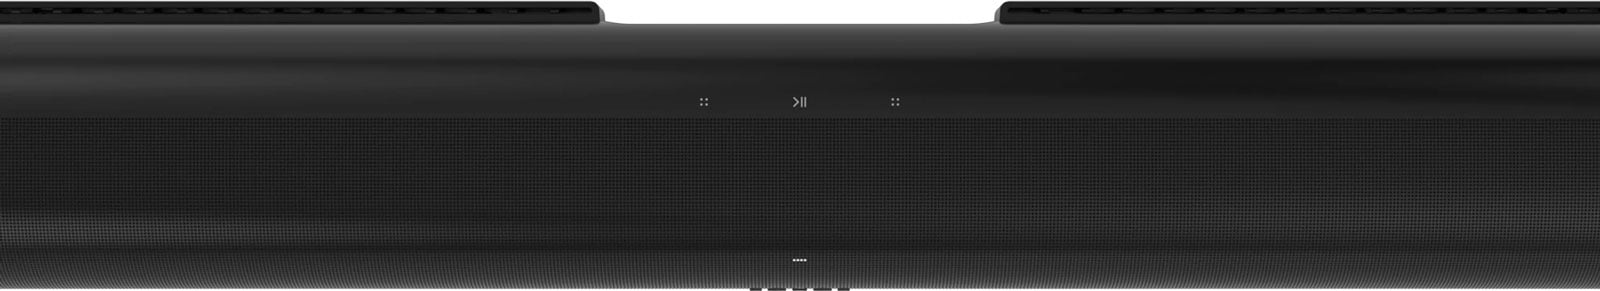 Play & next buttons on the black sonos arc